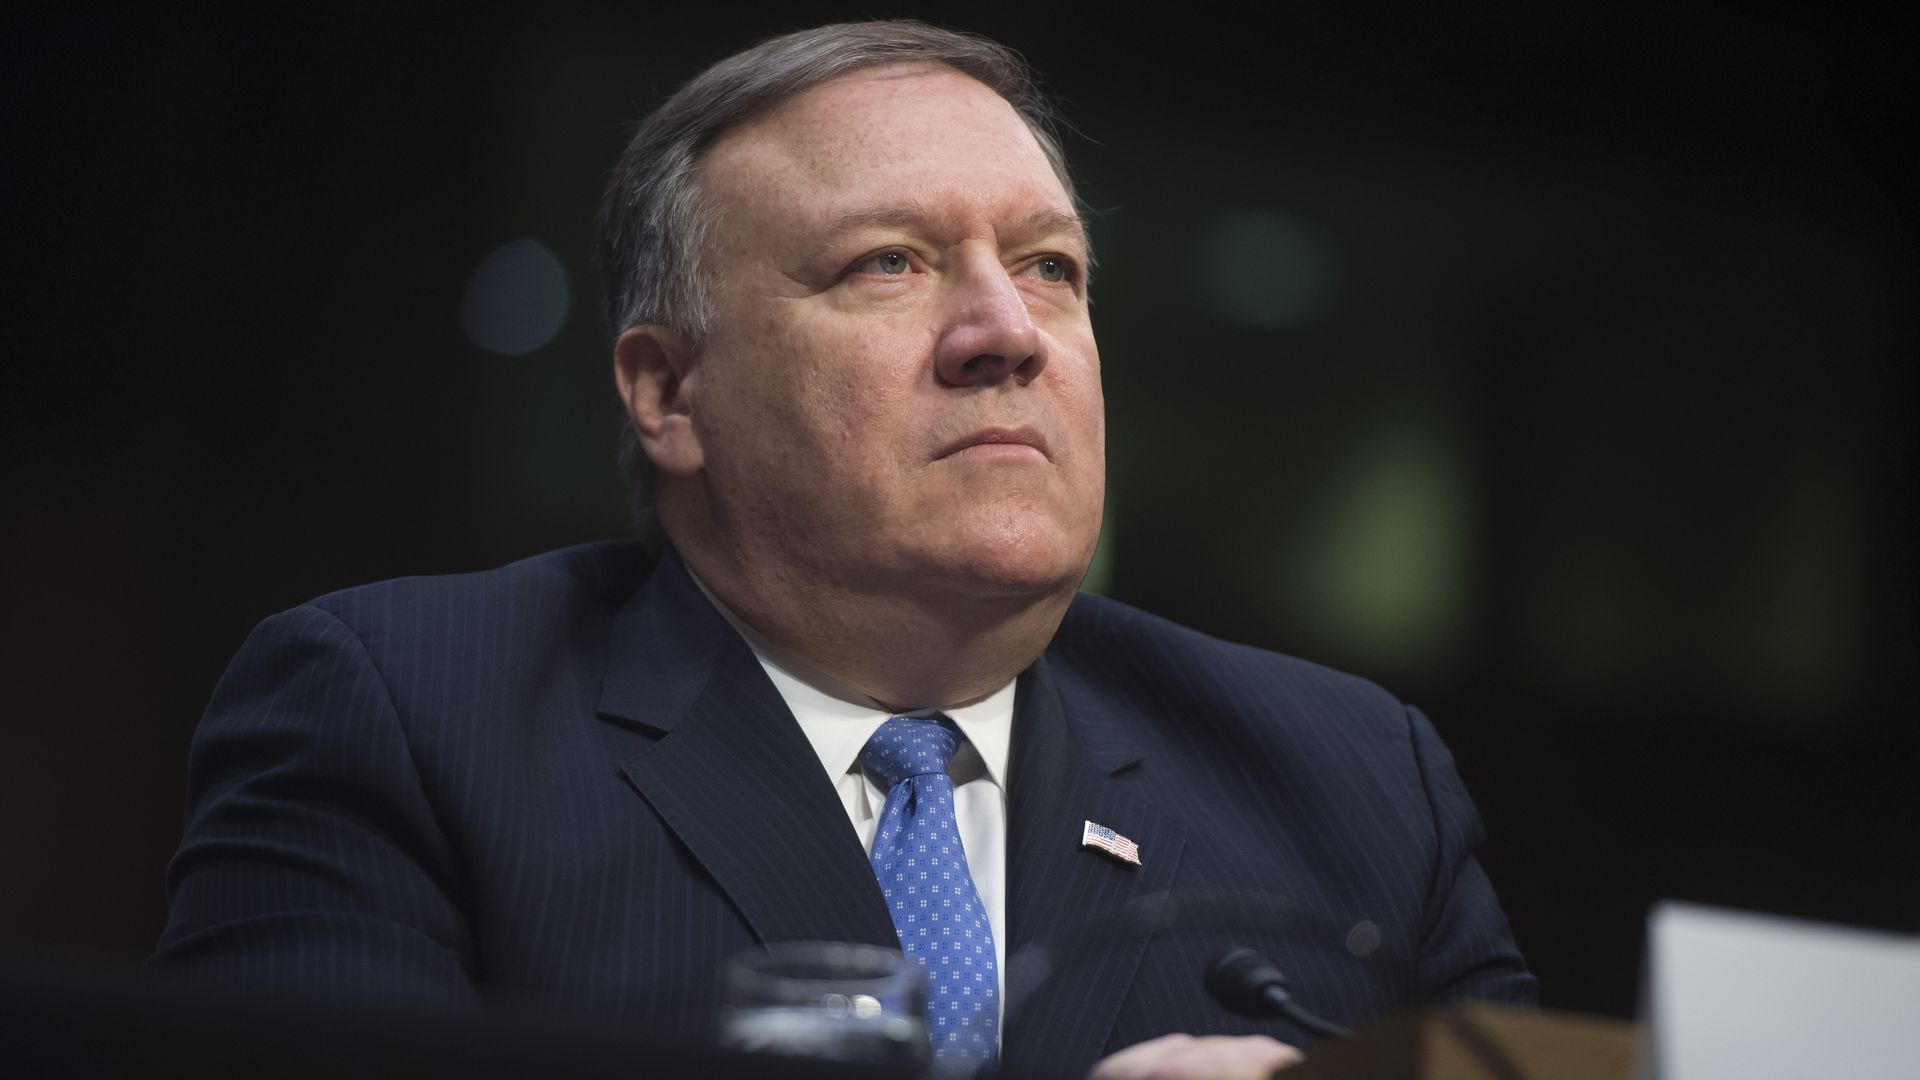 CIA Director Mike Pompeo testifies on worldwide threats during a Senate Intelligence Committee hearing.